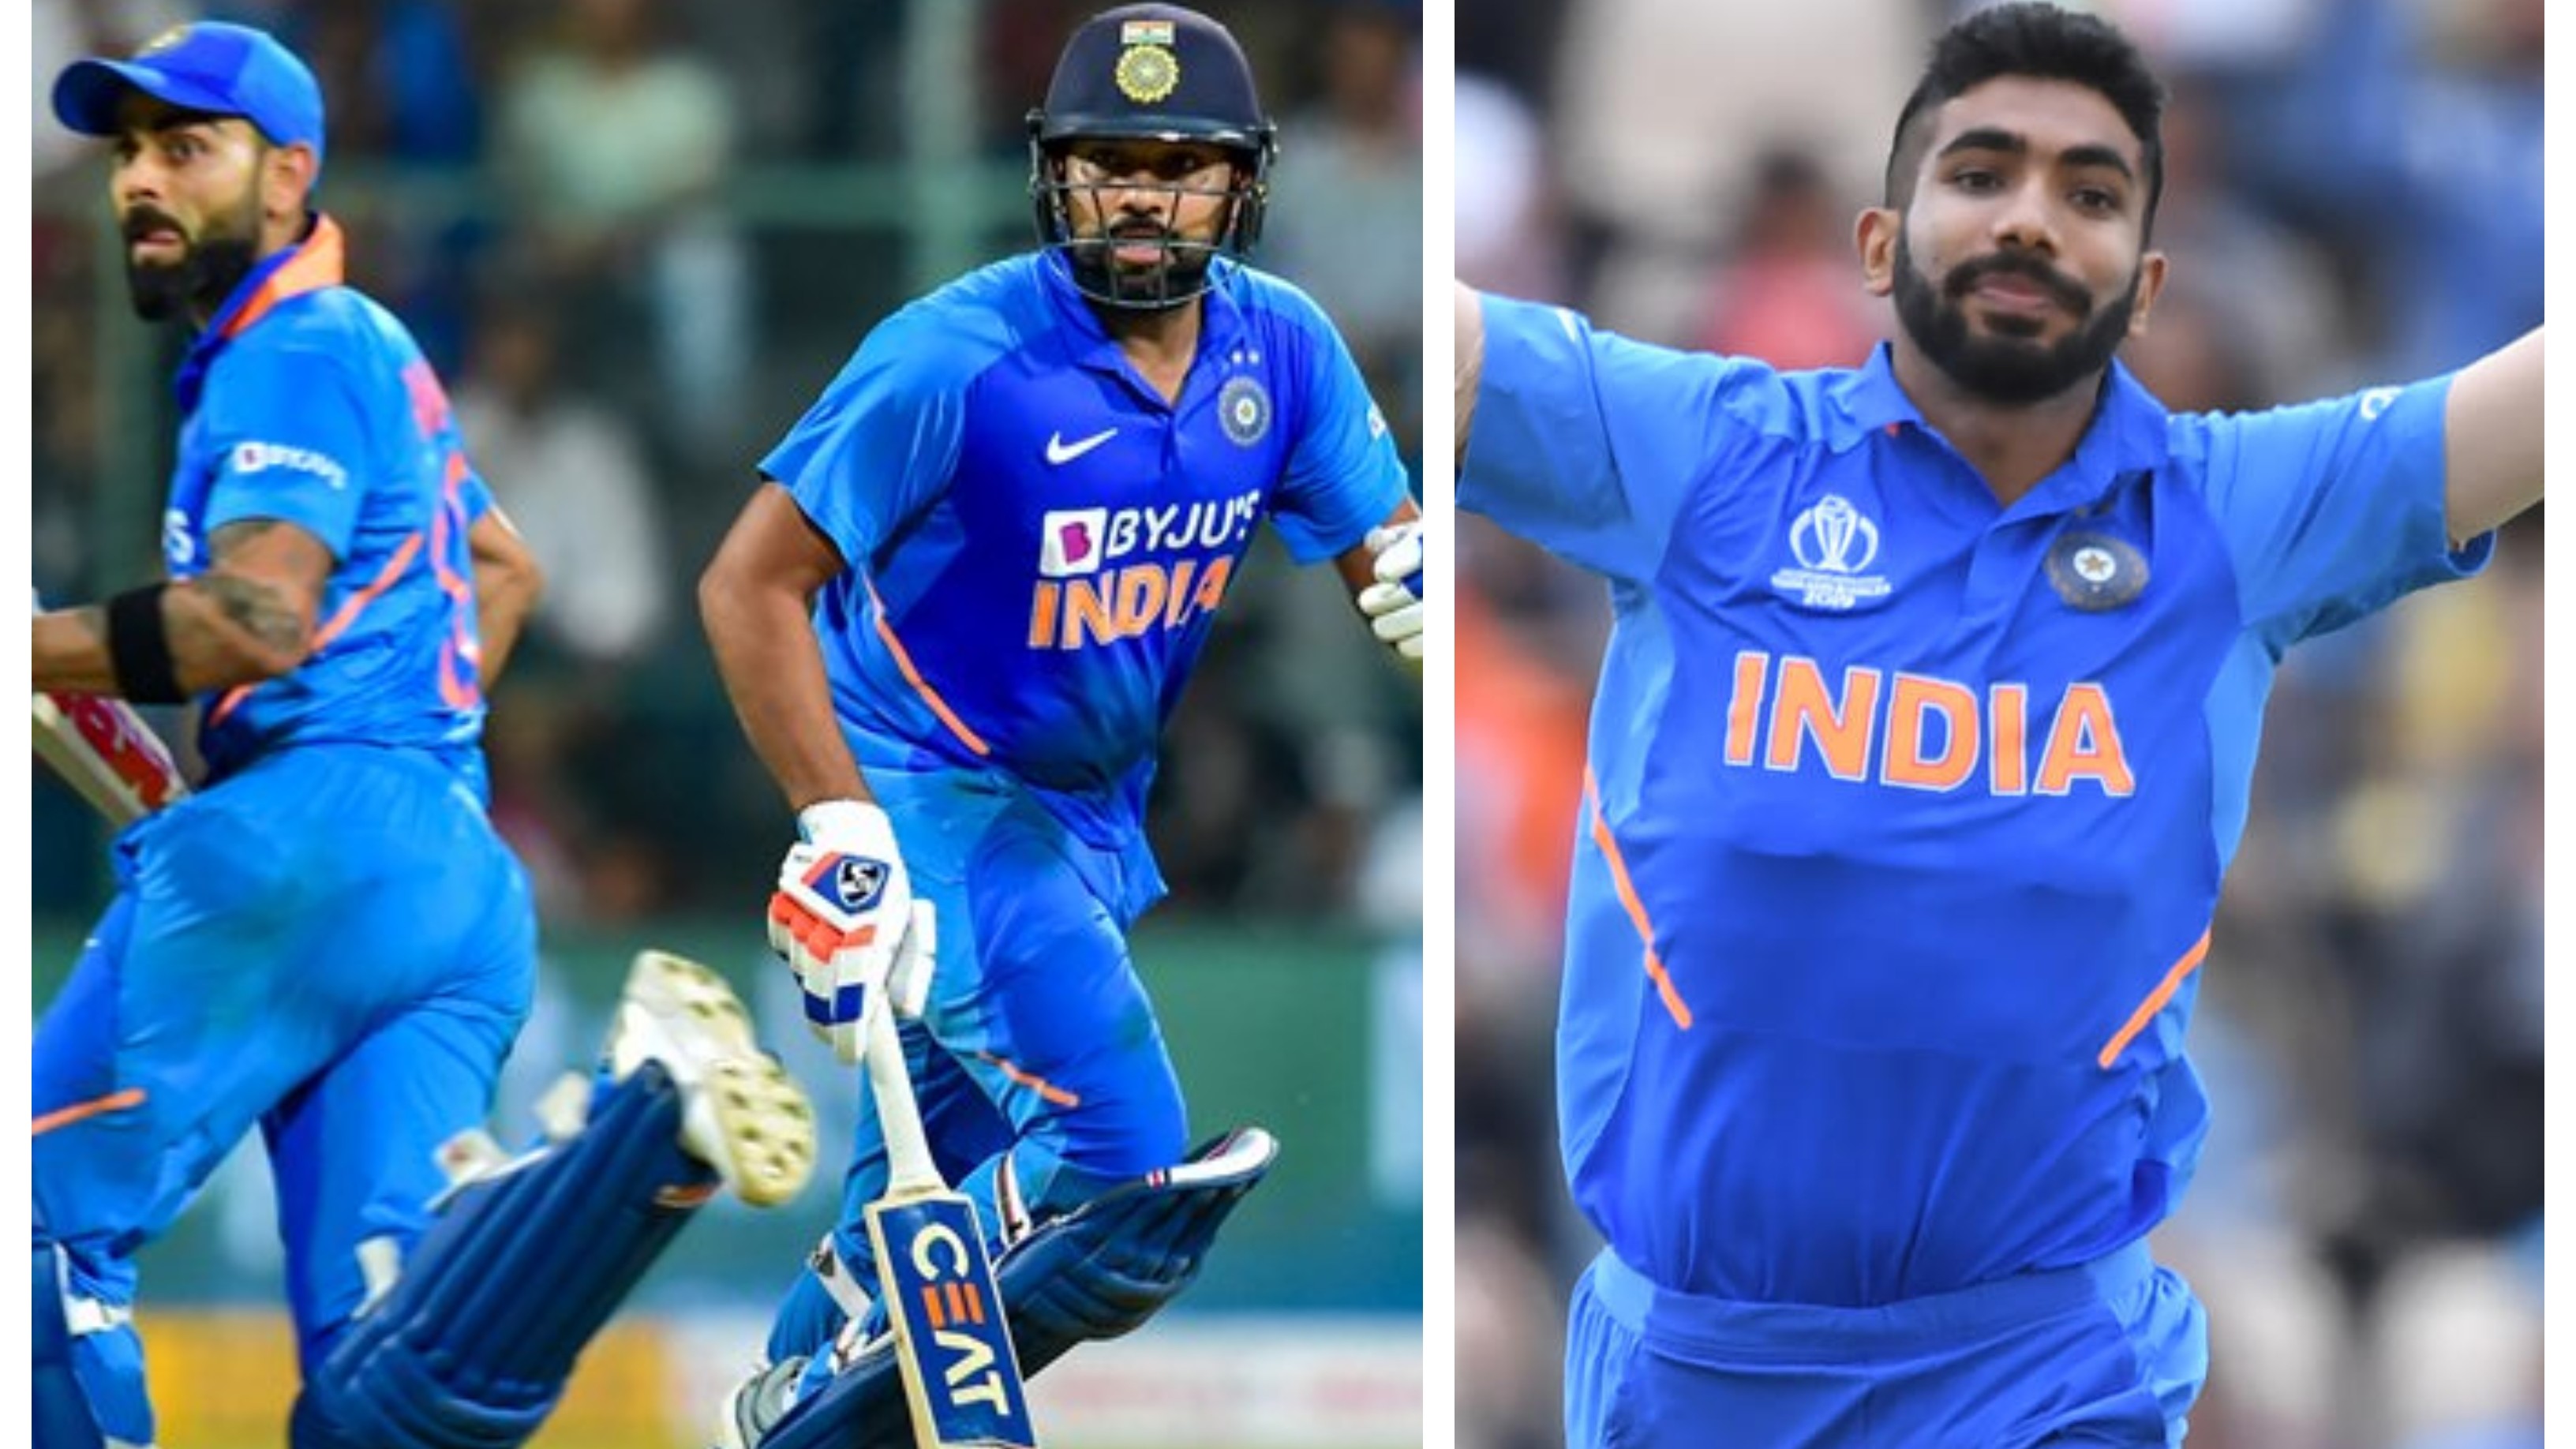 Kohli, Rohit maintain top two spots in ODI batting rankings; Bumrah remains second among bowlers